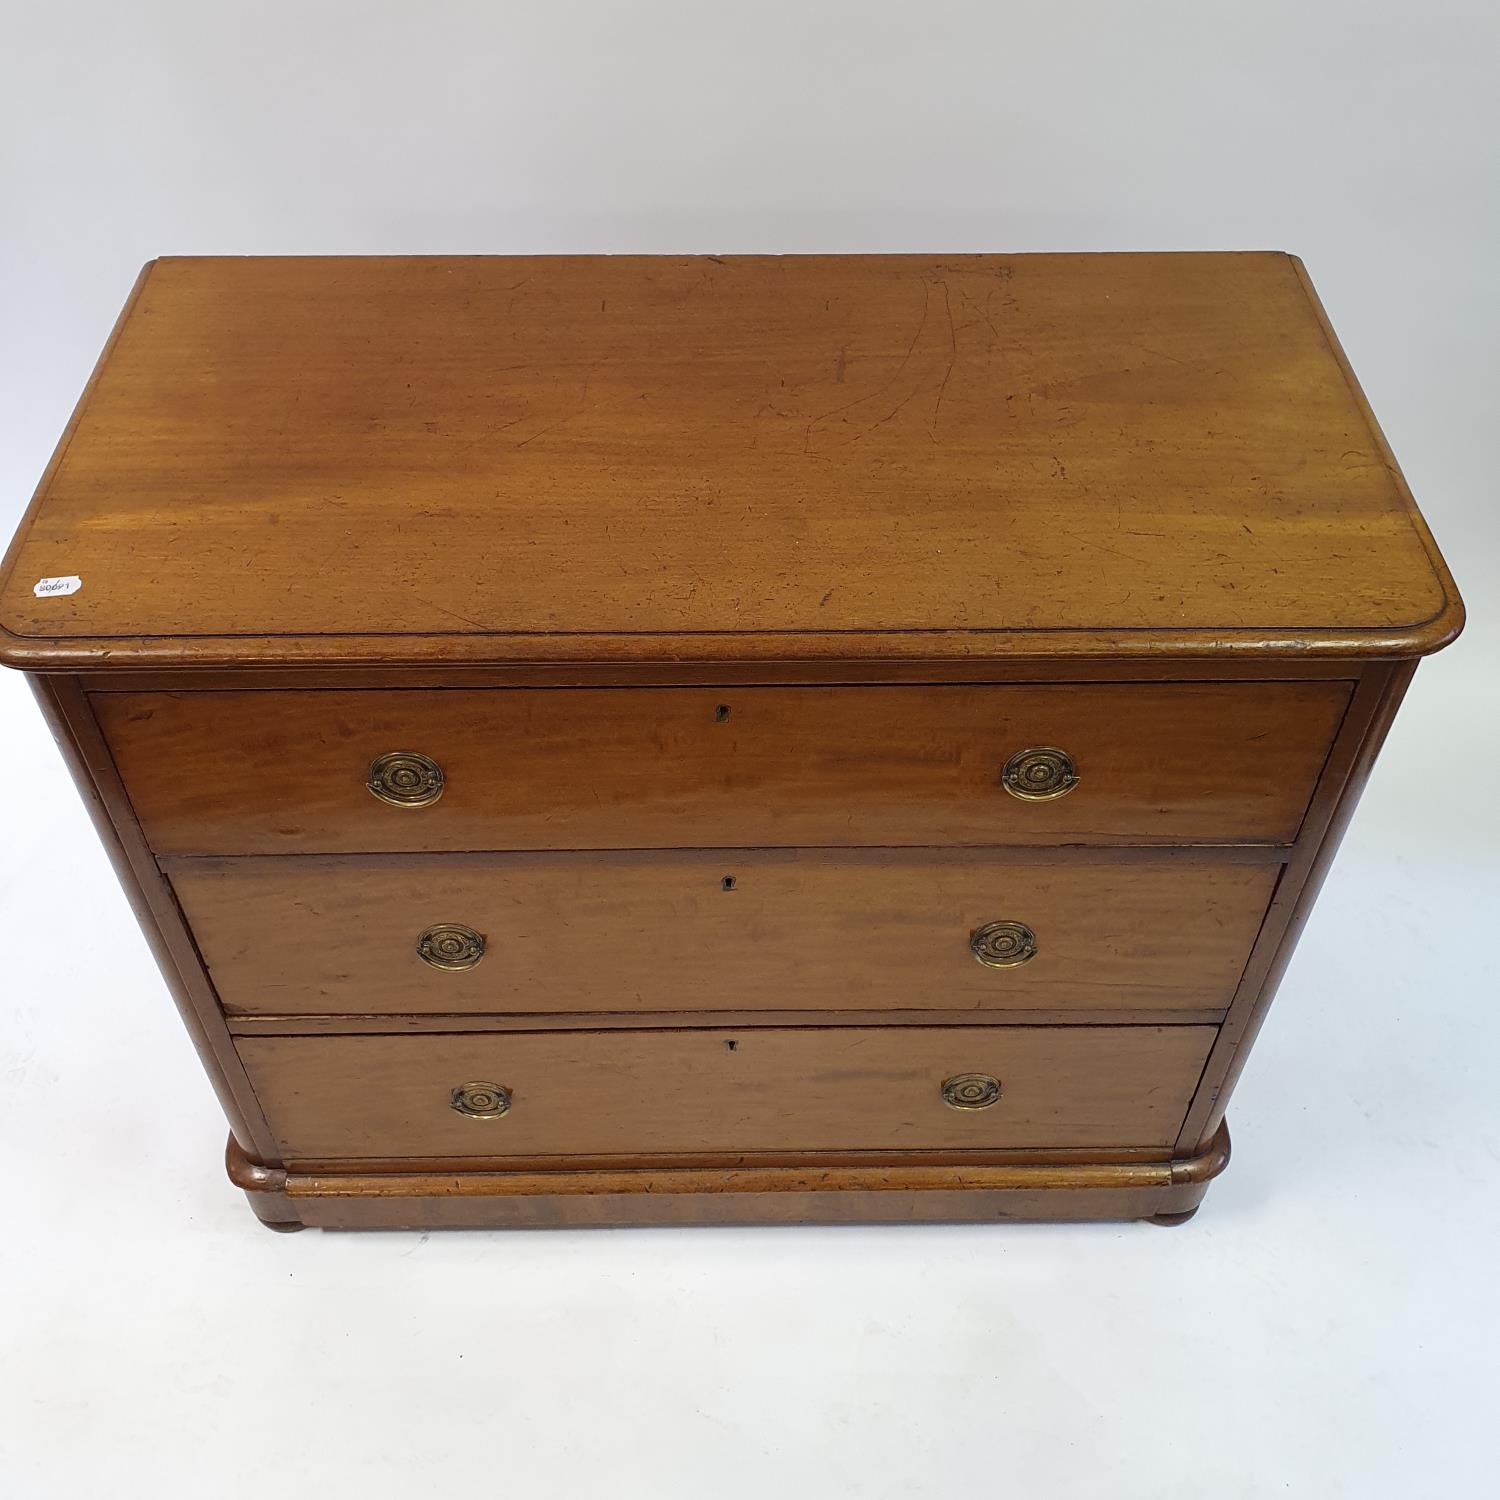 A 19th century mahogany chest, having three long drawers, 104 cm wide - Image 2 of 3